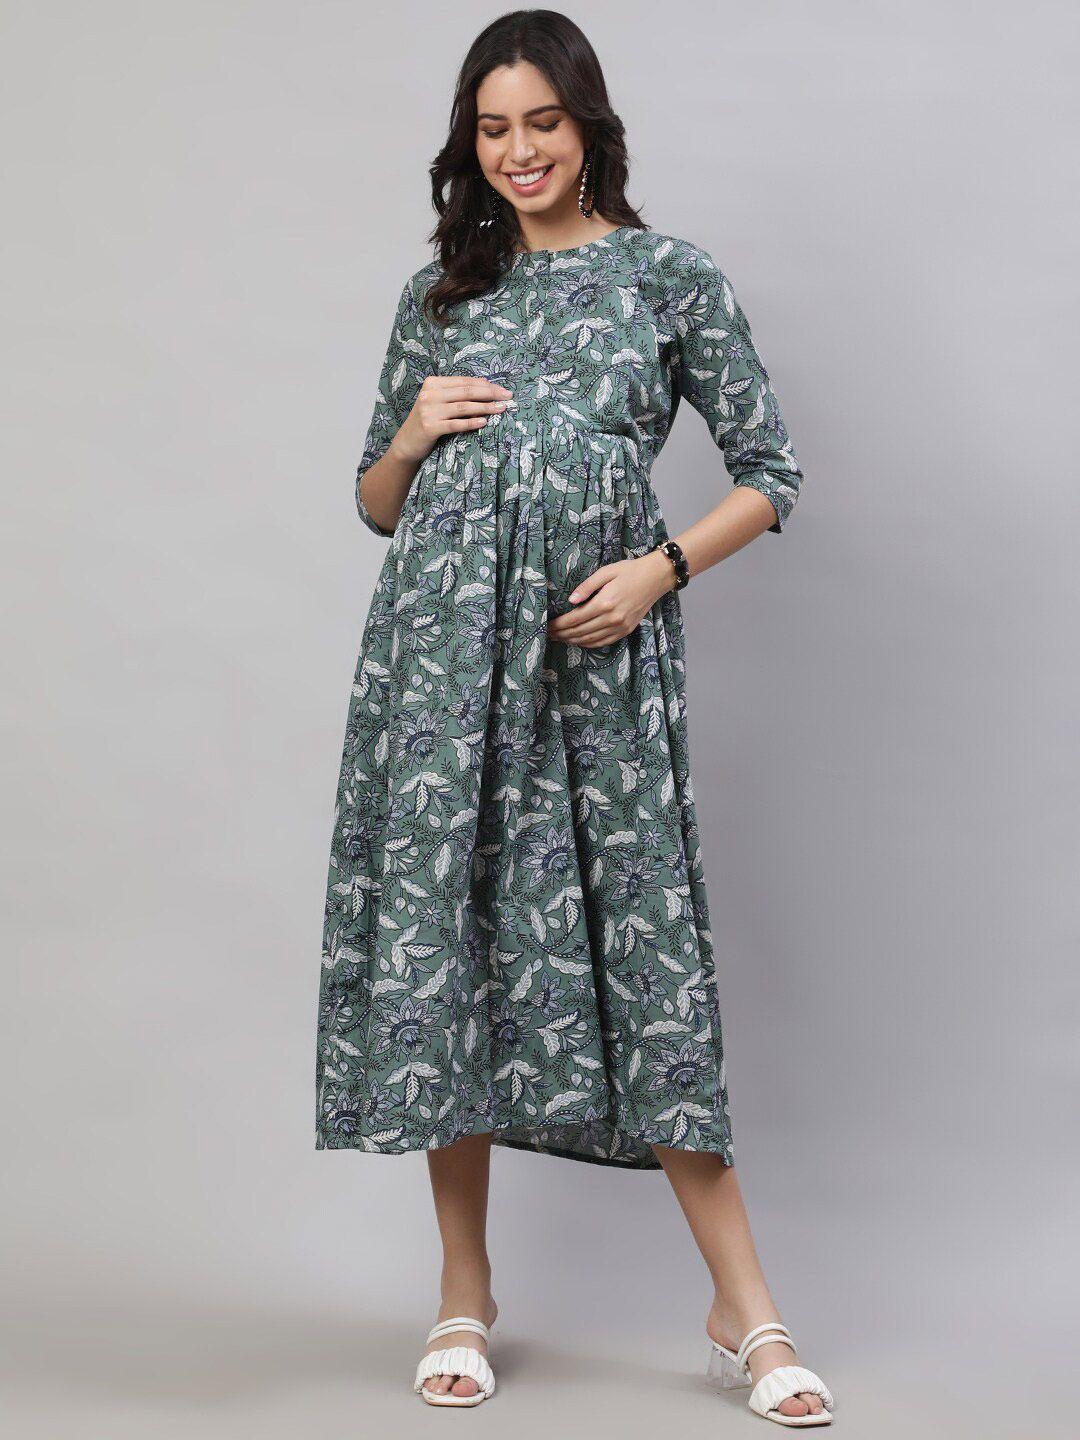 nayo floral printed fit & flare pure cotton maternity dress